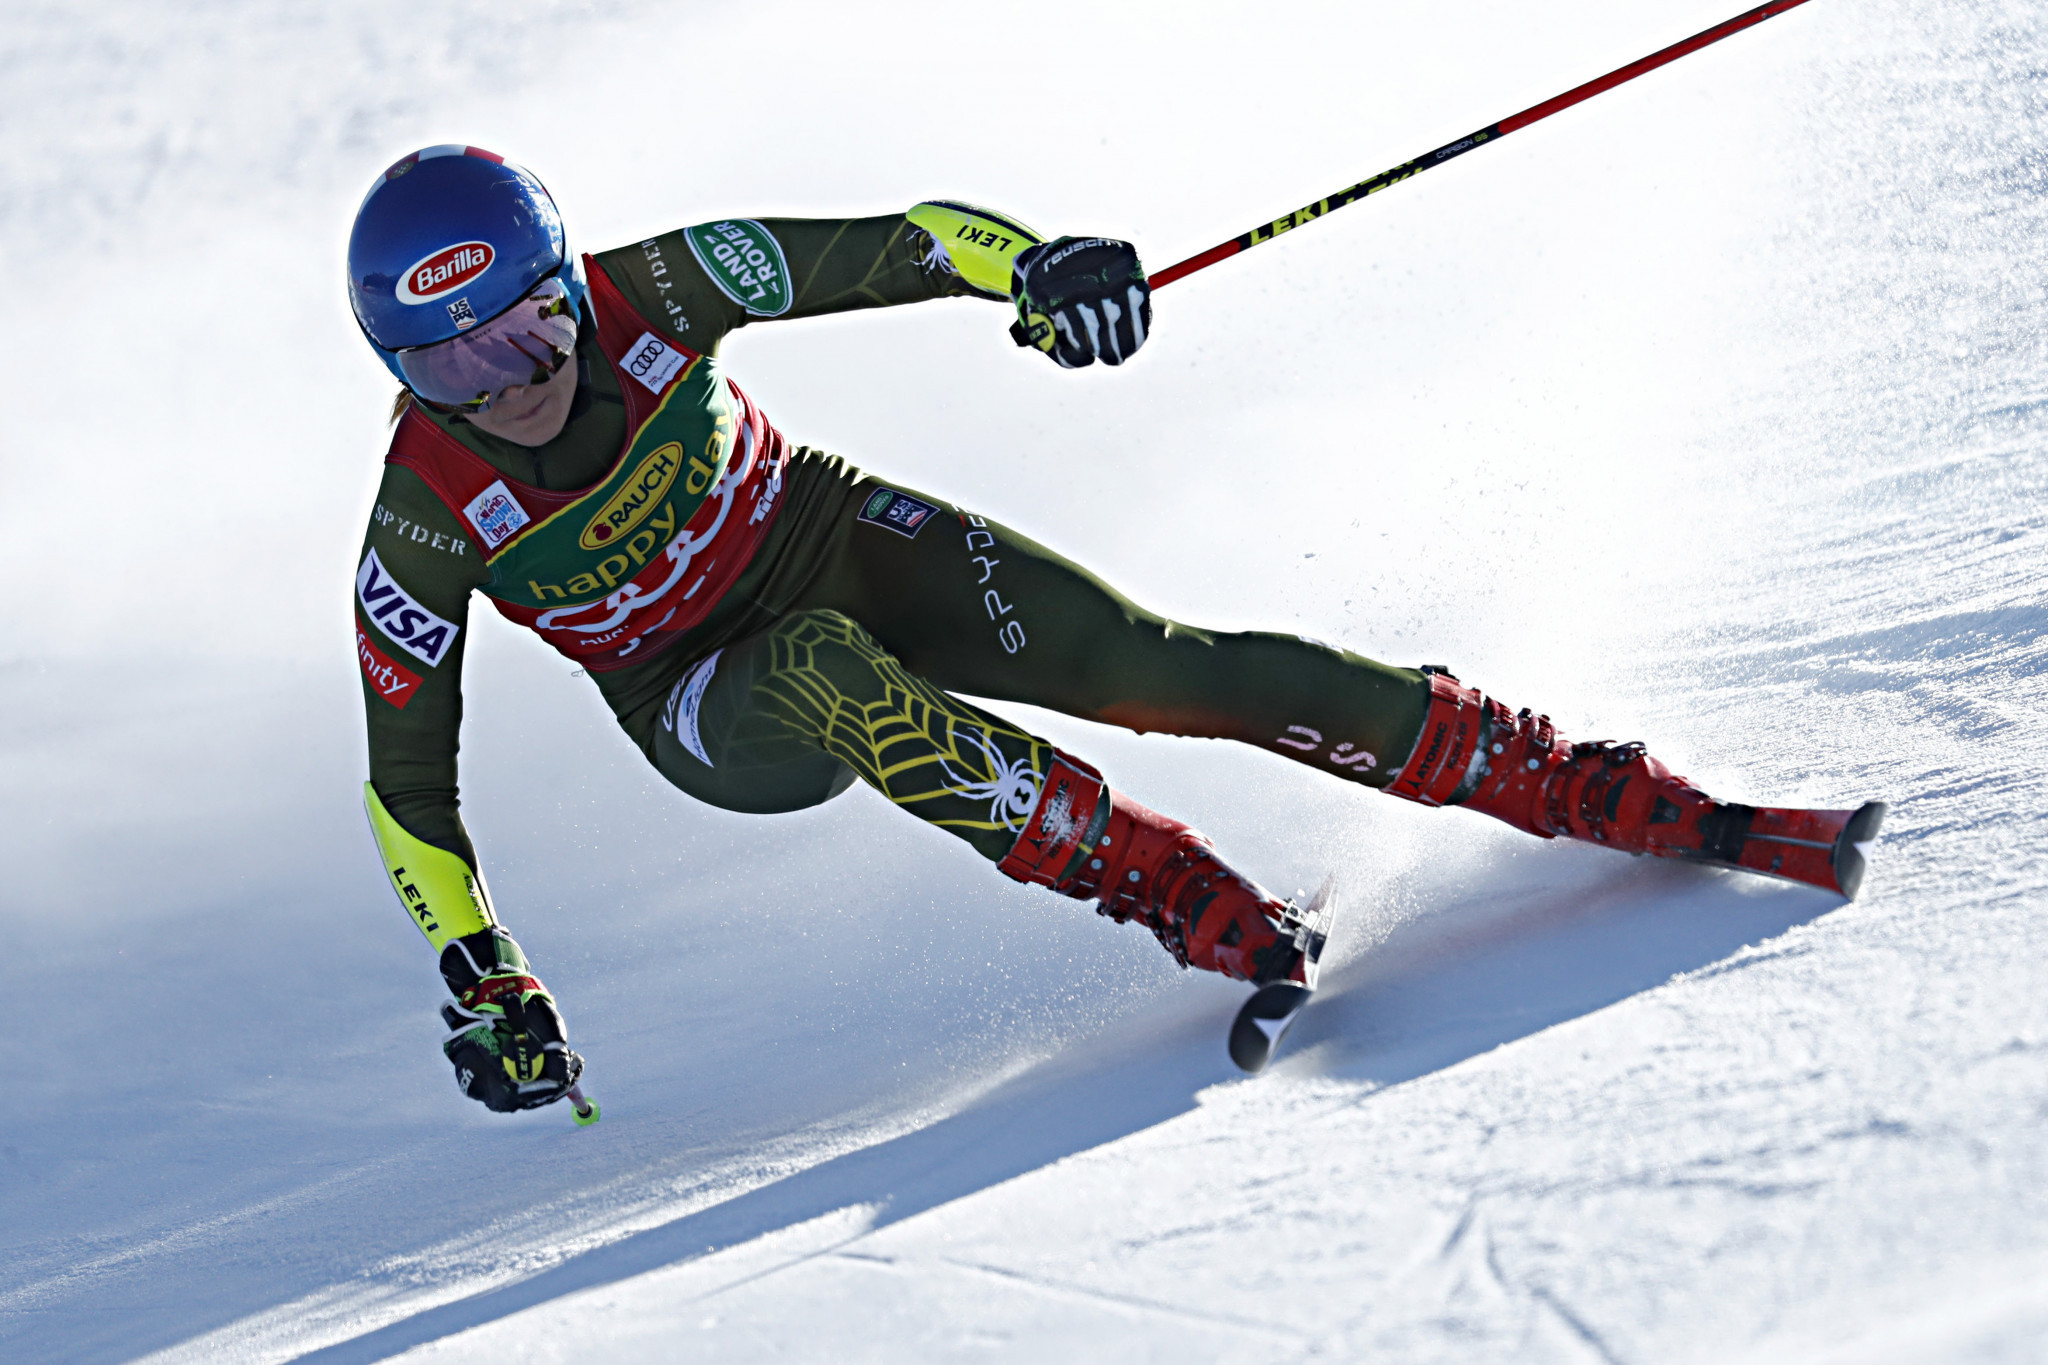 Mikaela Shiffrin will aim to continue her strong run in Levi ©Getty Images